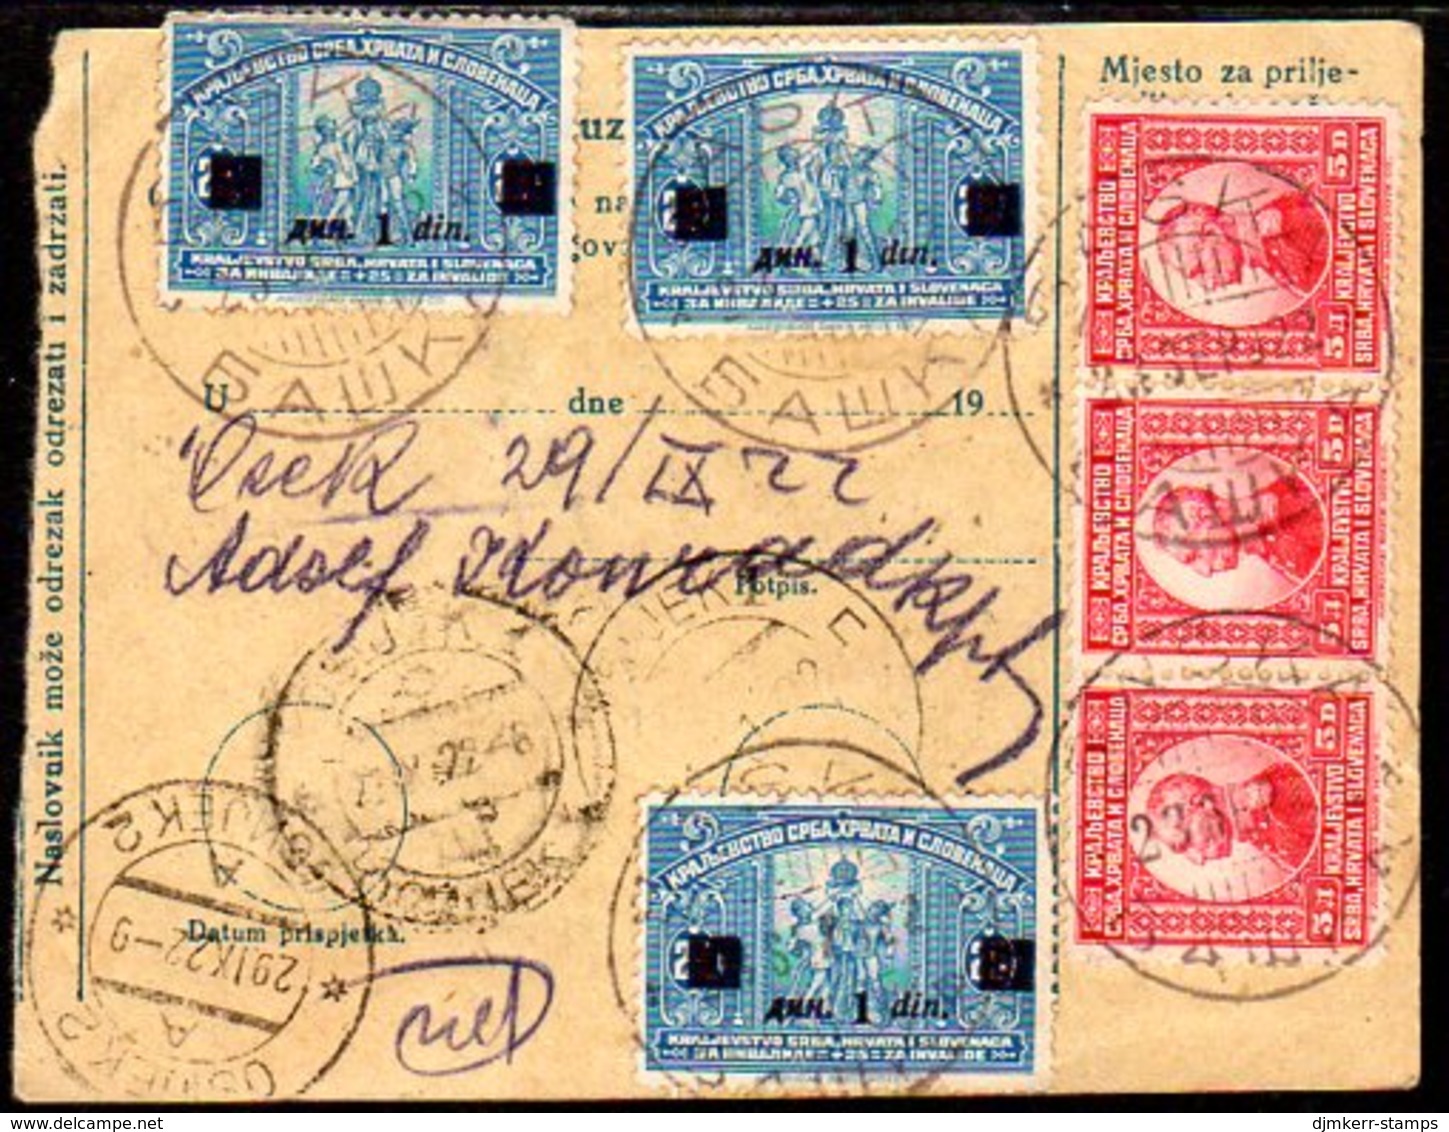 YUGOSLAVIA 1923 Parcel Card With War Invalids 1 D.on 25 Pa Brown-lilac Surcharge X 3 (Michel €60 Each) - Covers & Documents